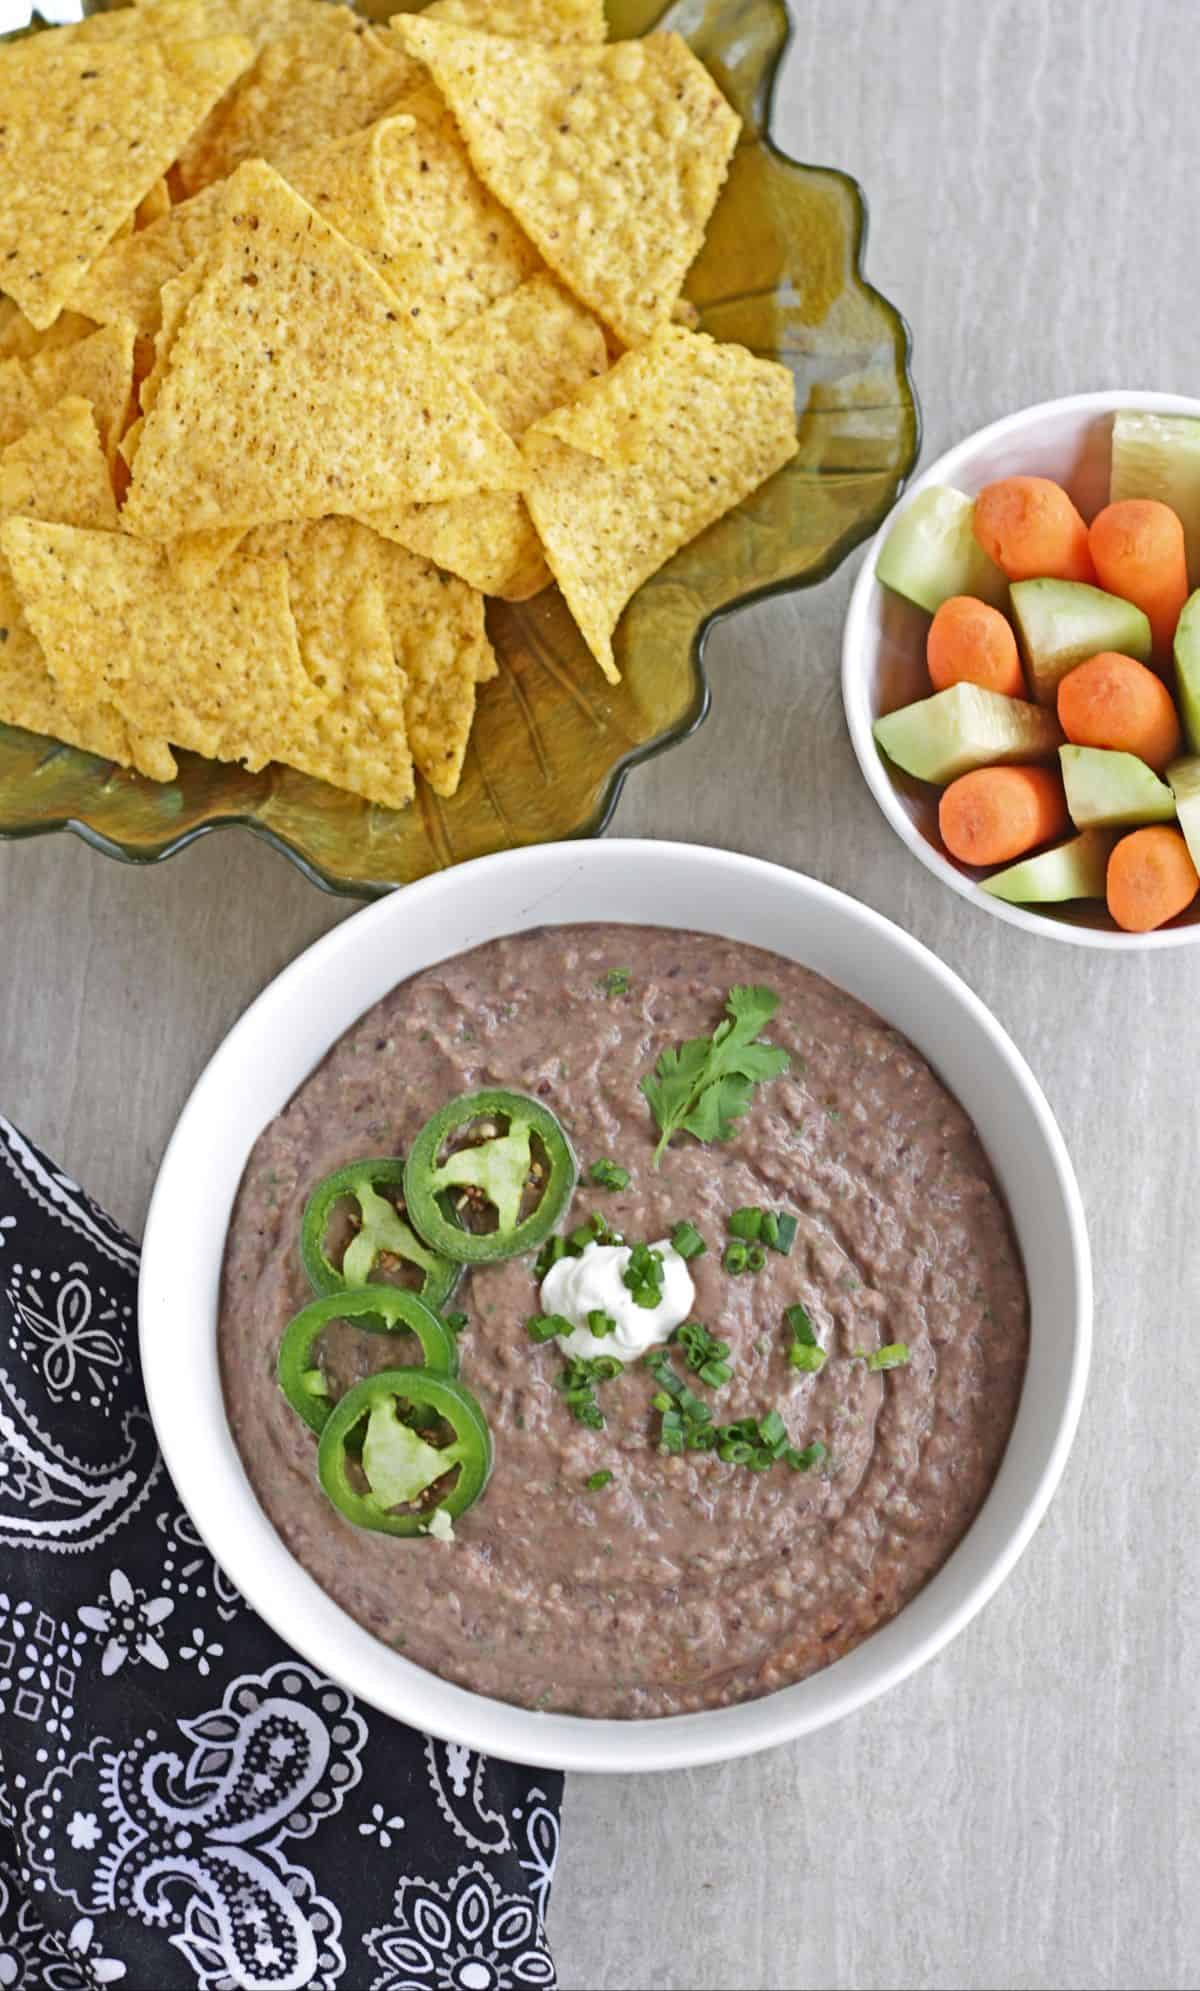 bean dip in a bowl with jalapeno garnish and chips and vegetables on the side